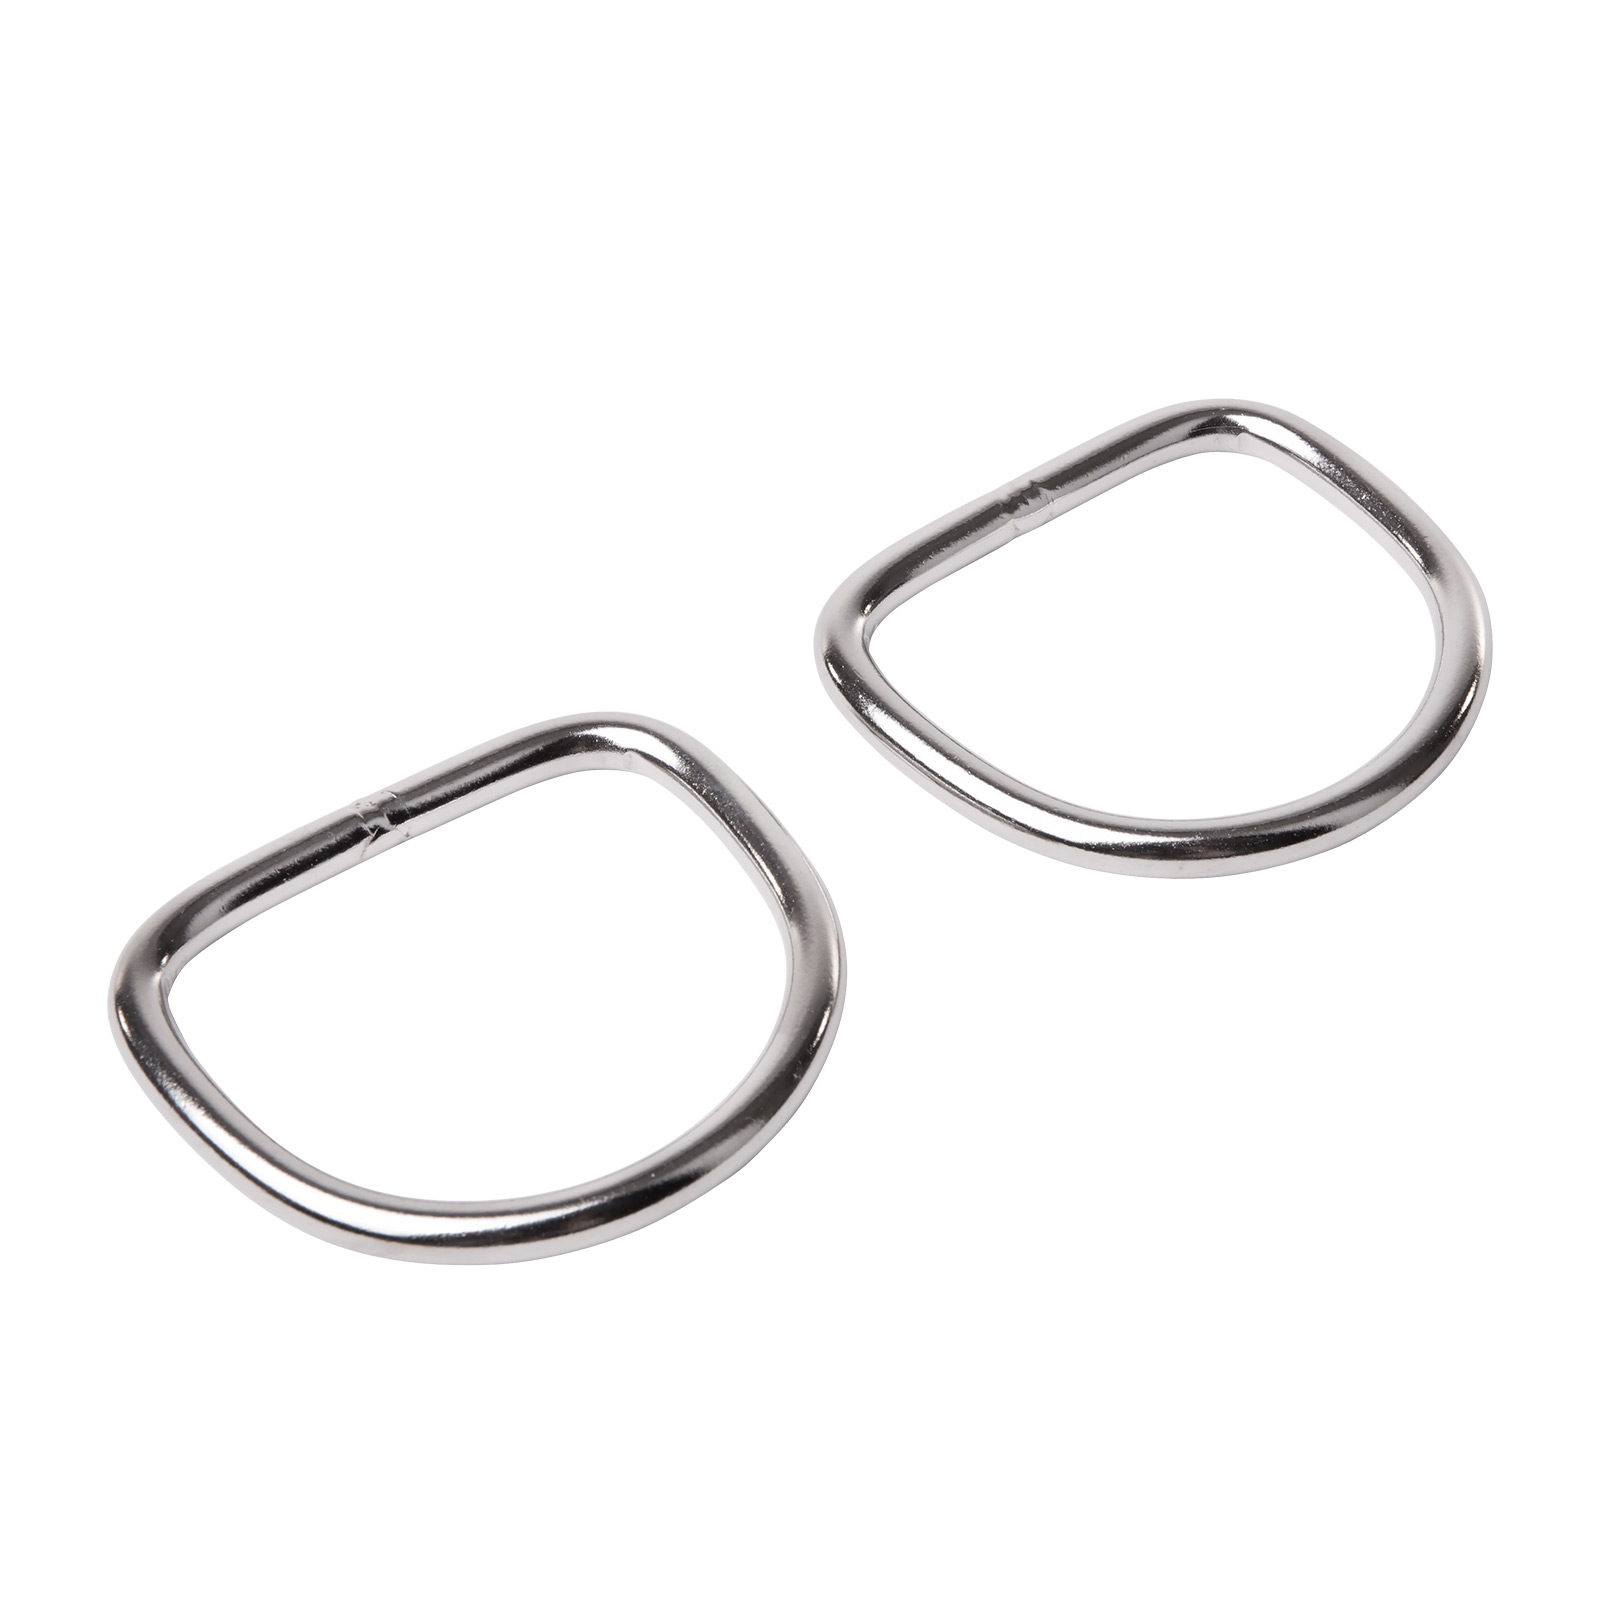 Stainless Steal D-Ring (PAIR)